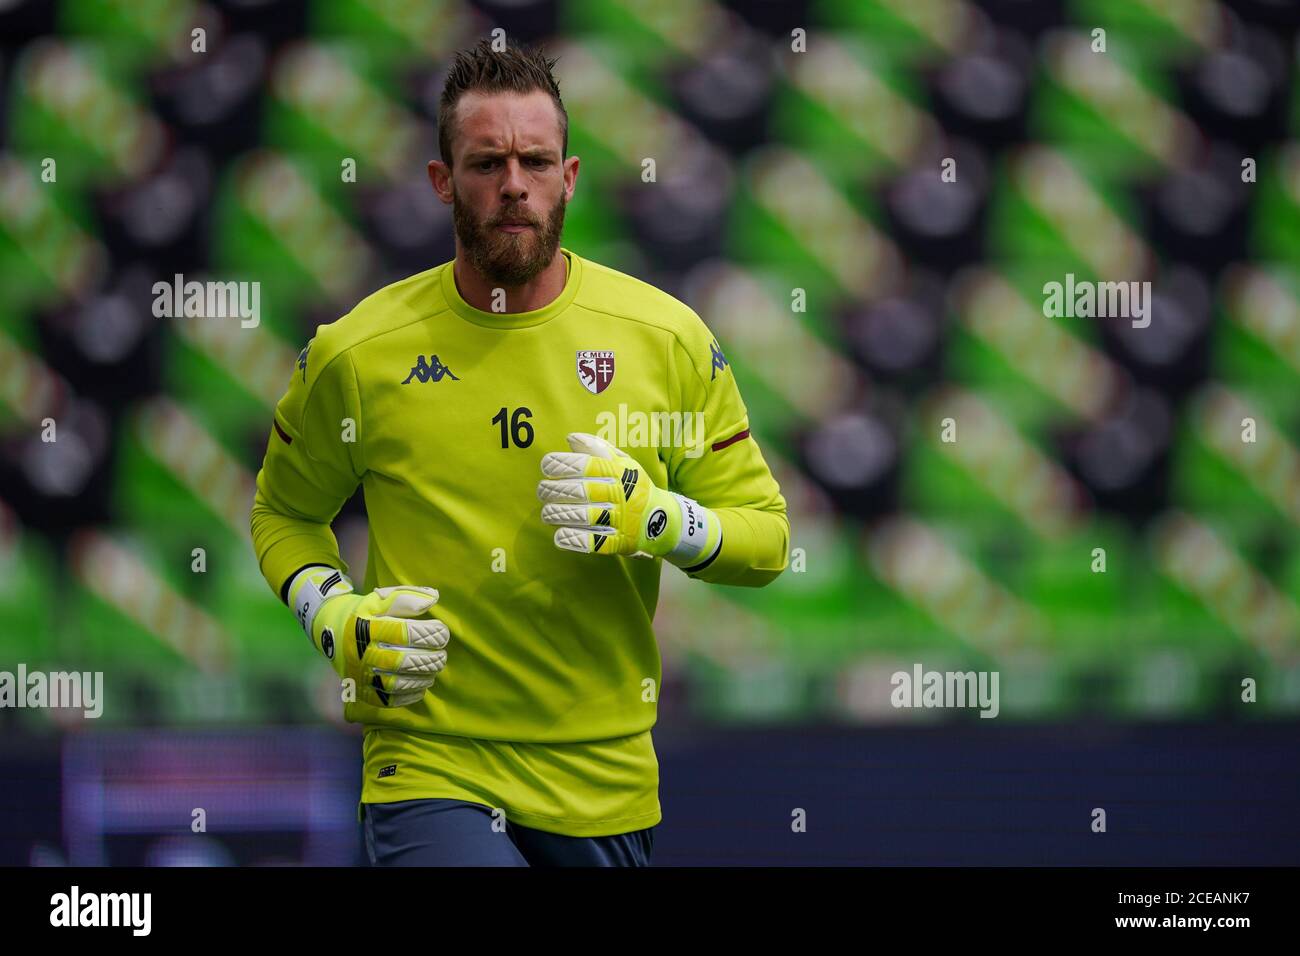 METZ, FRANCE - AUGUST 30: Alexandre Oukidja of Metz before the match  between FC Metz and AS Monaco on August 30, 2020 in Metz, The Netherlands.  *** Local Caption *** Alexandre Oukidja Stock Photo - Alamy